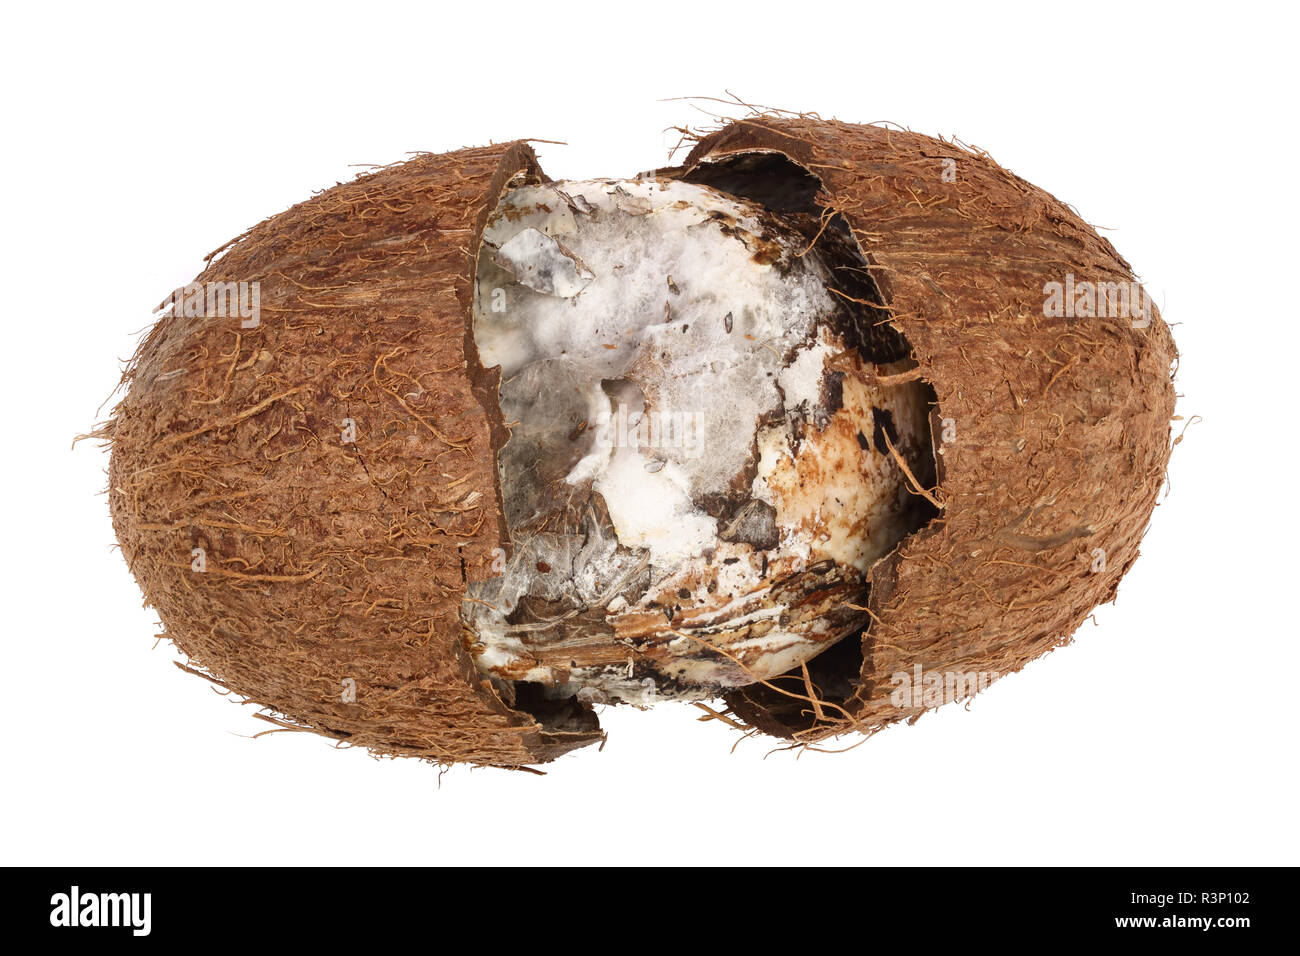 Coconut spoiled with mold isolated on white background. Top view Stock Photo